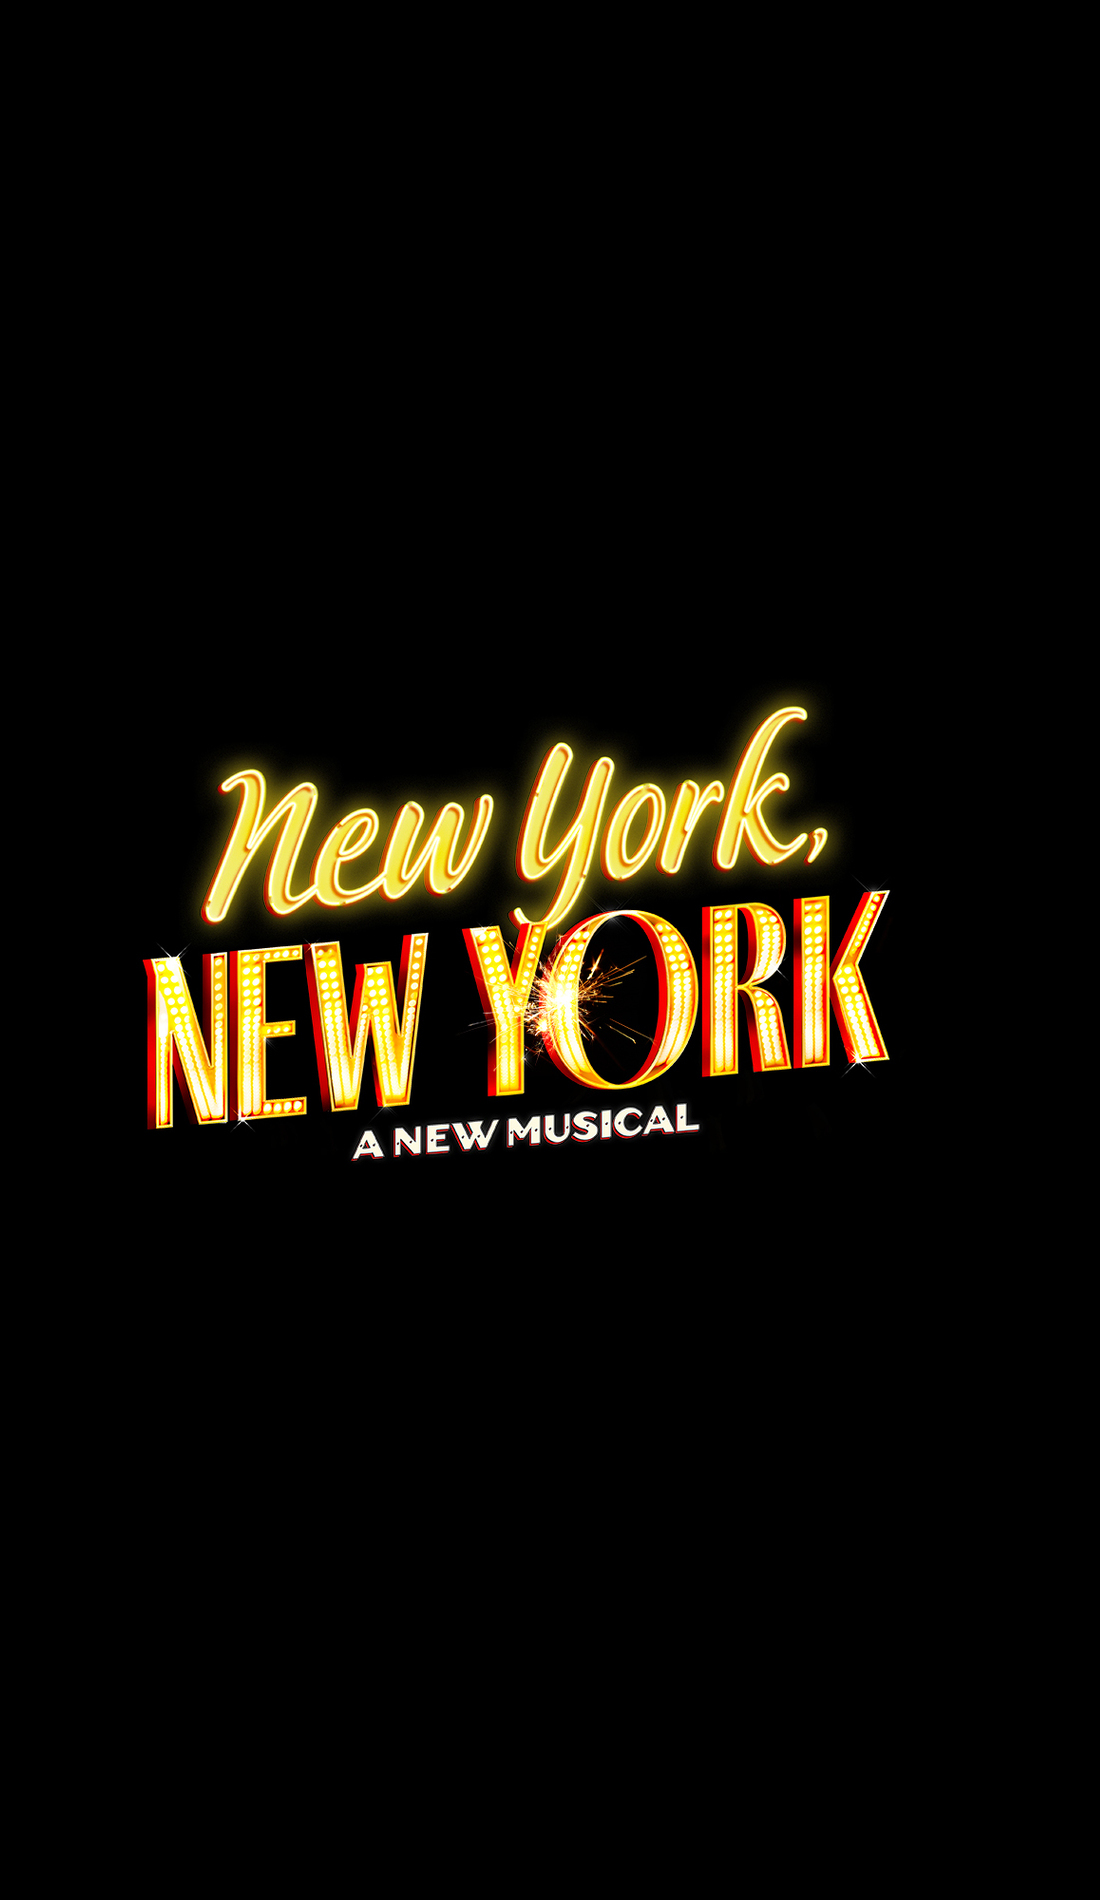 A New York, New York: A New Musical live event